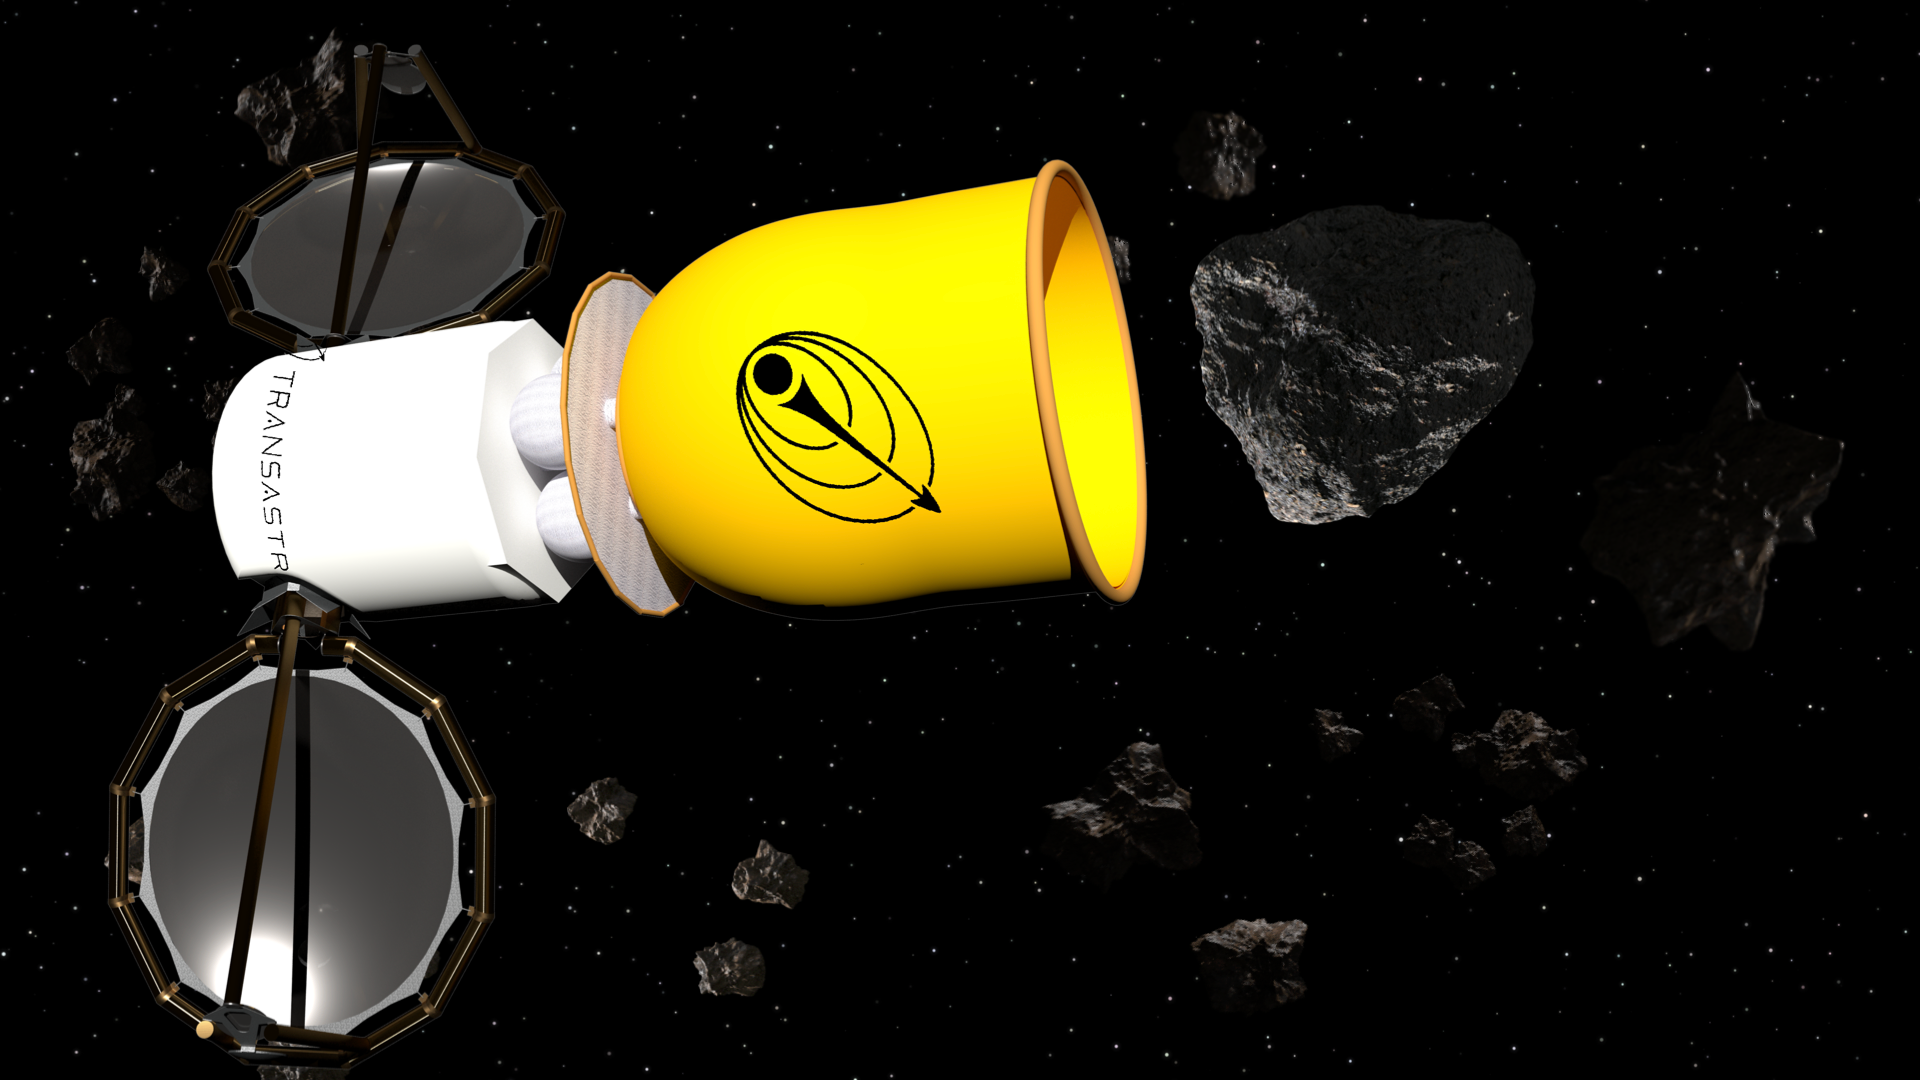 Conceptual illustration of the TransAstra Worker Bee during its first asteroid mining mission.